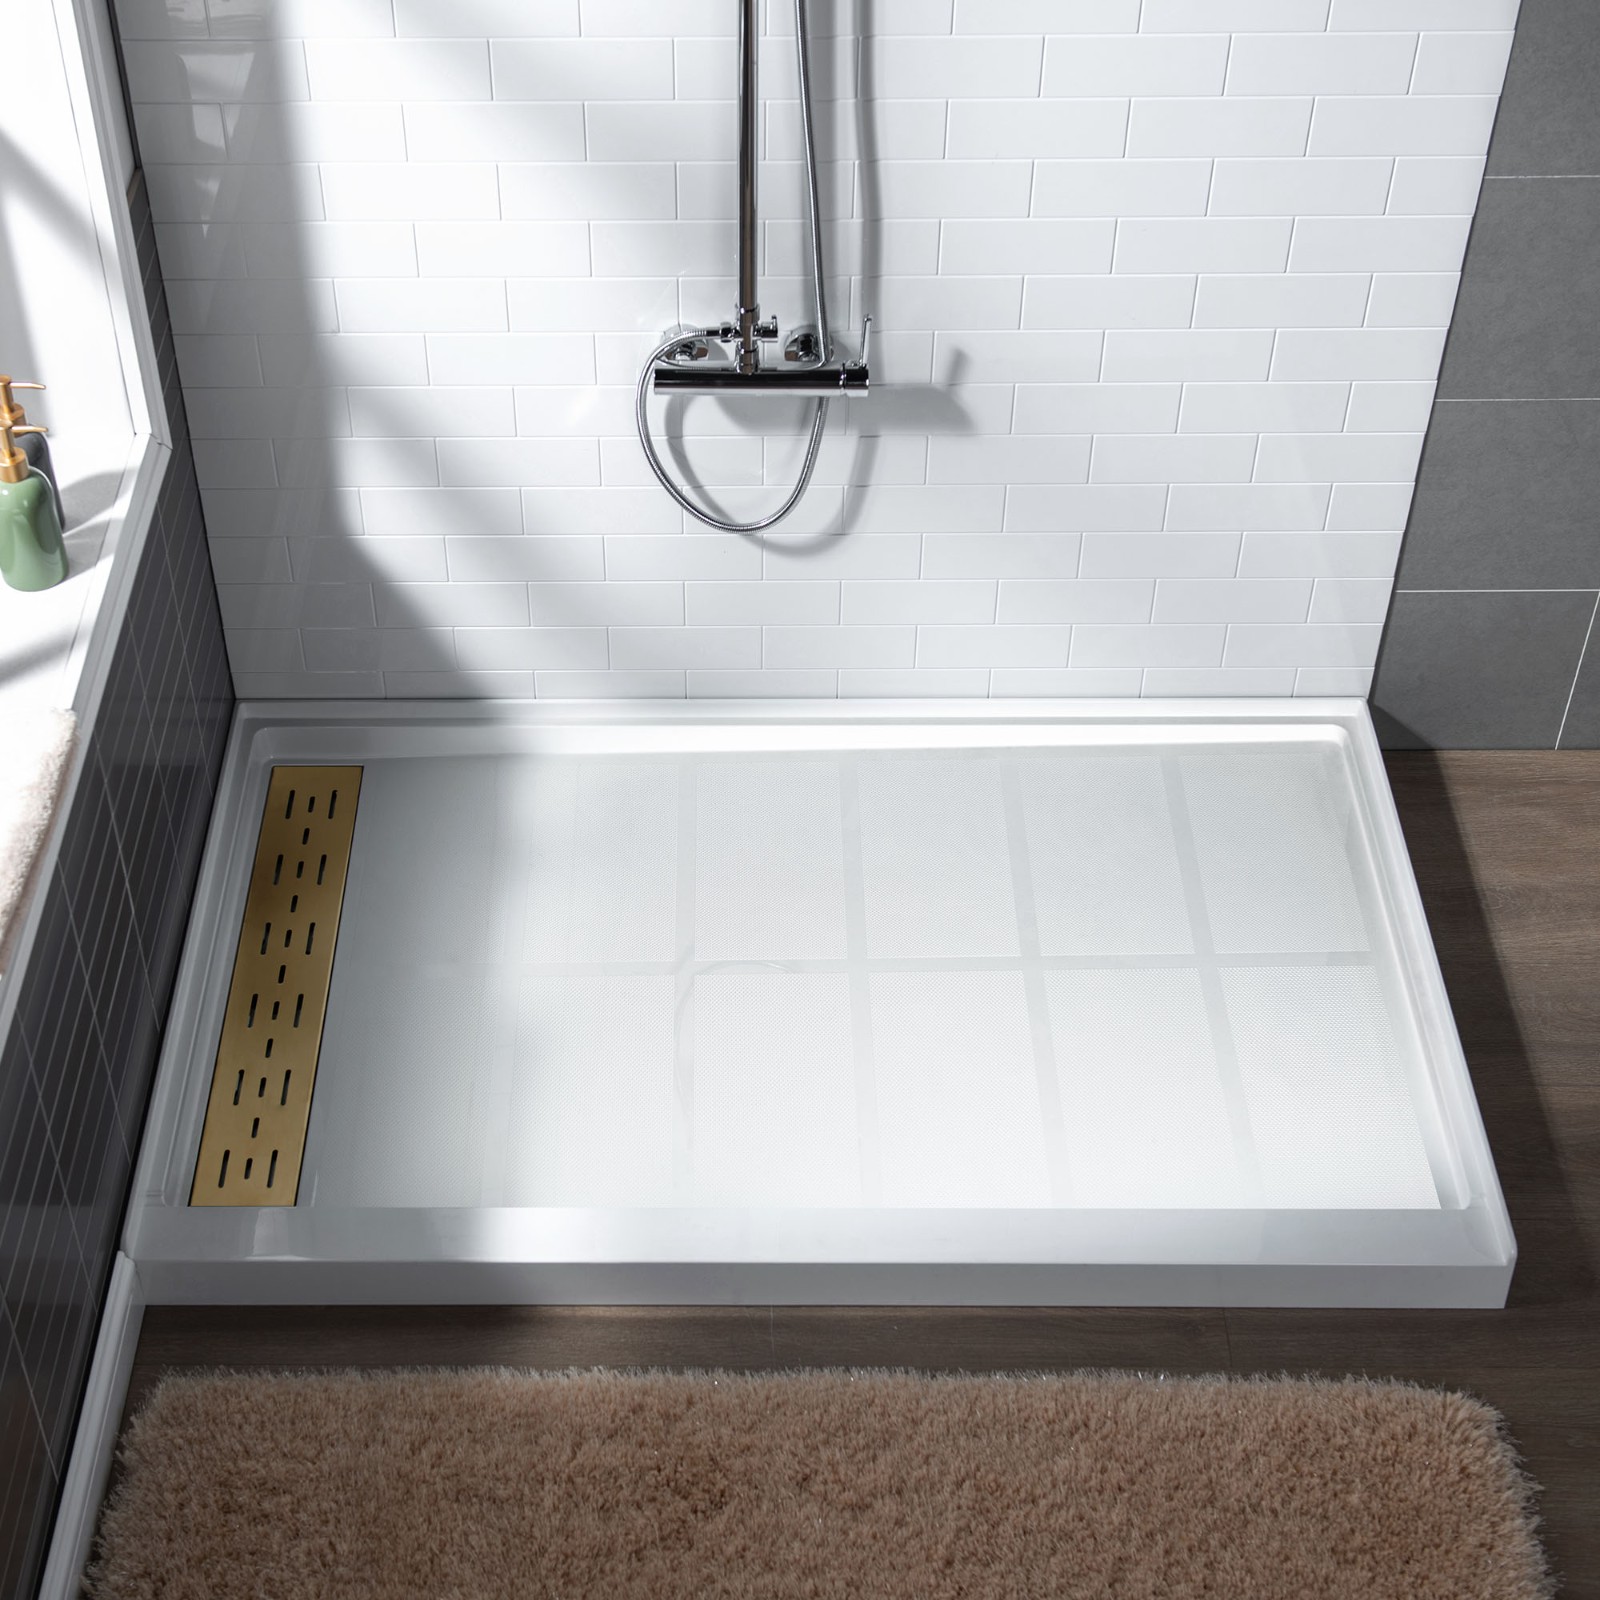  WOODBRIDGE SBR6030-1000L-BG SolidSurface Shower Base with Recessed Trench Side Including Brushed Gold Linear Cover, 60